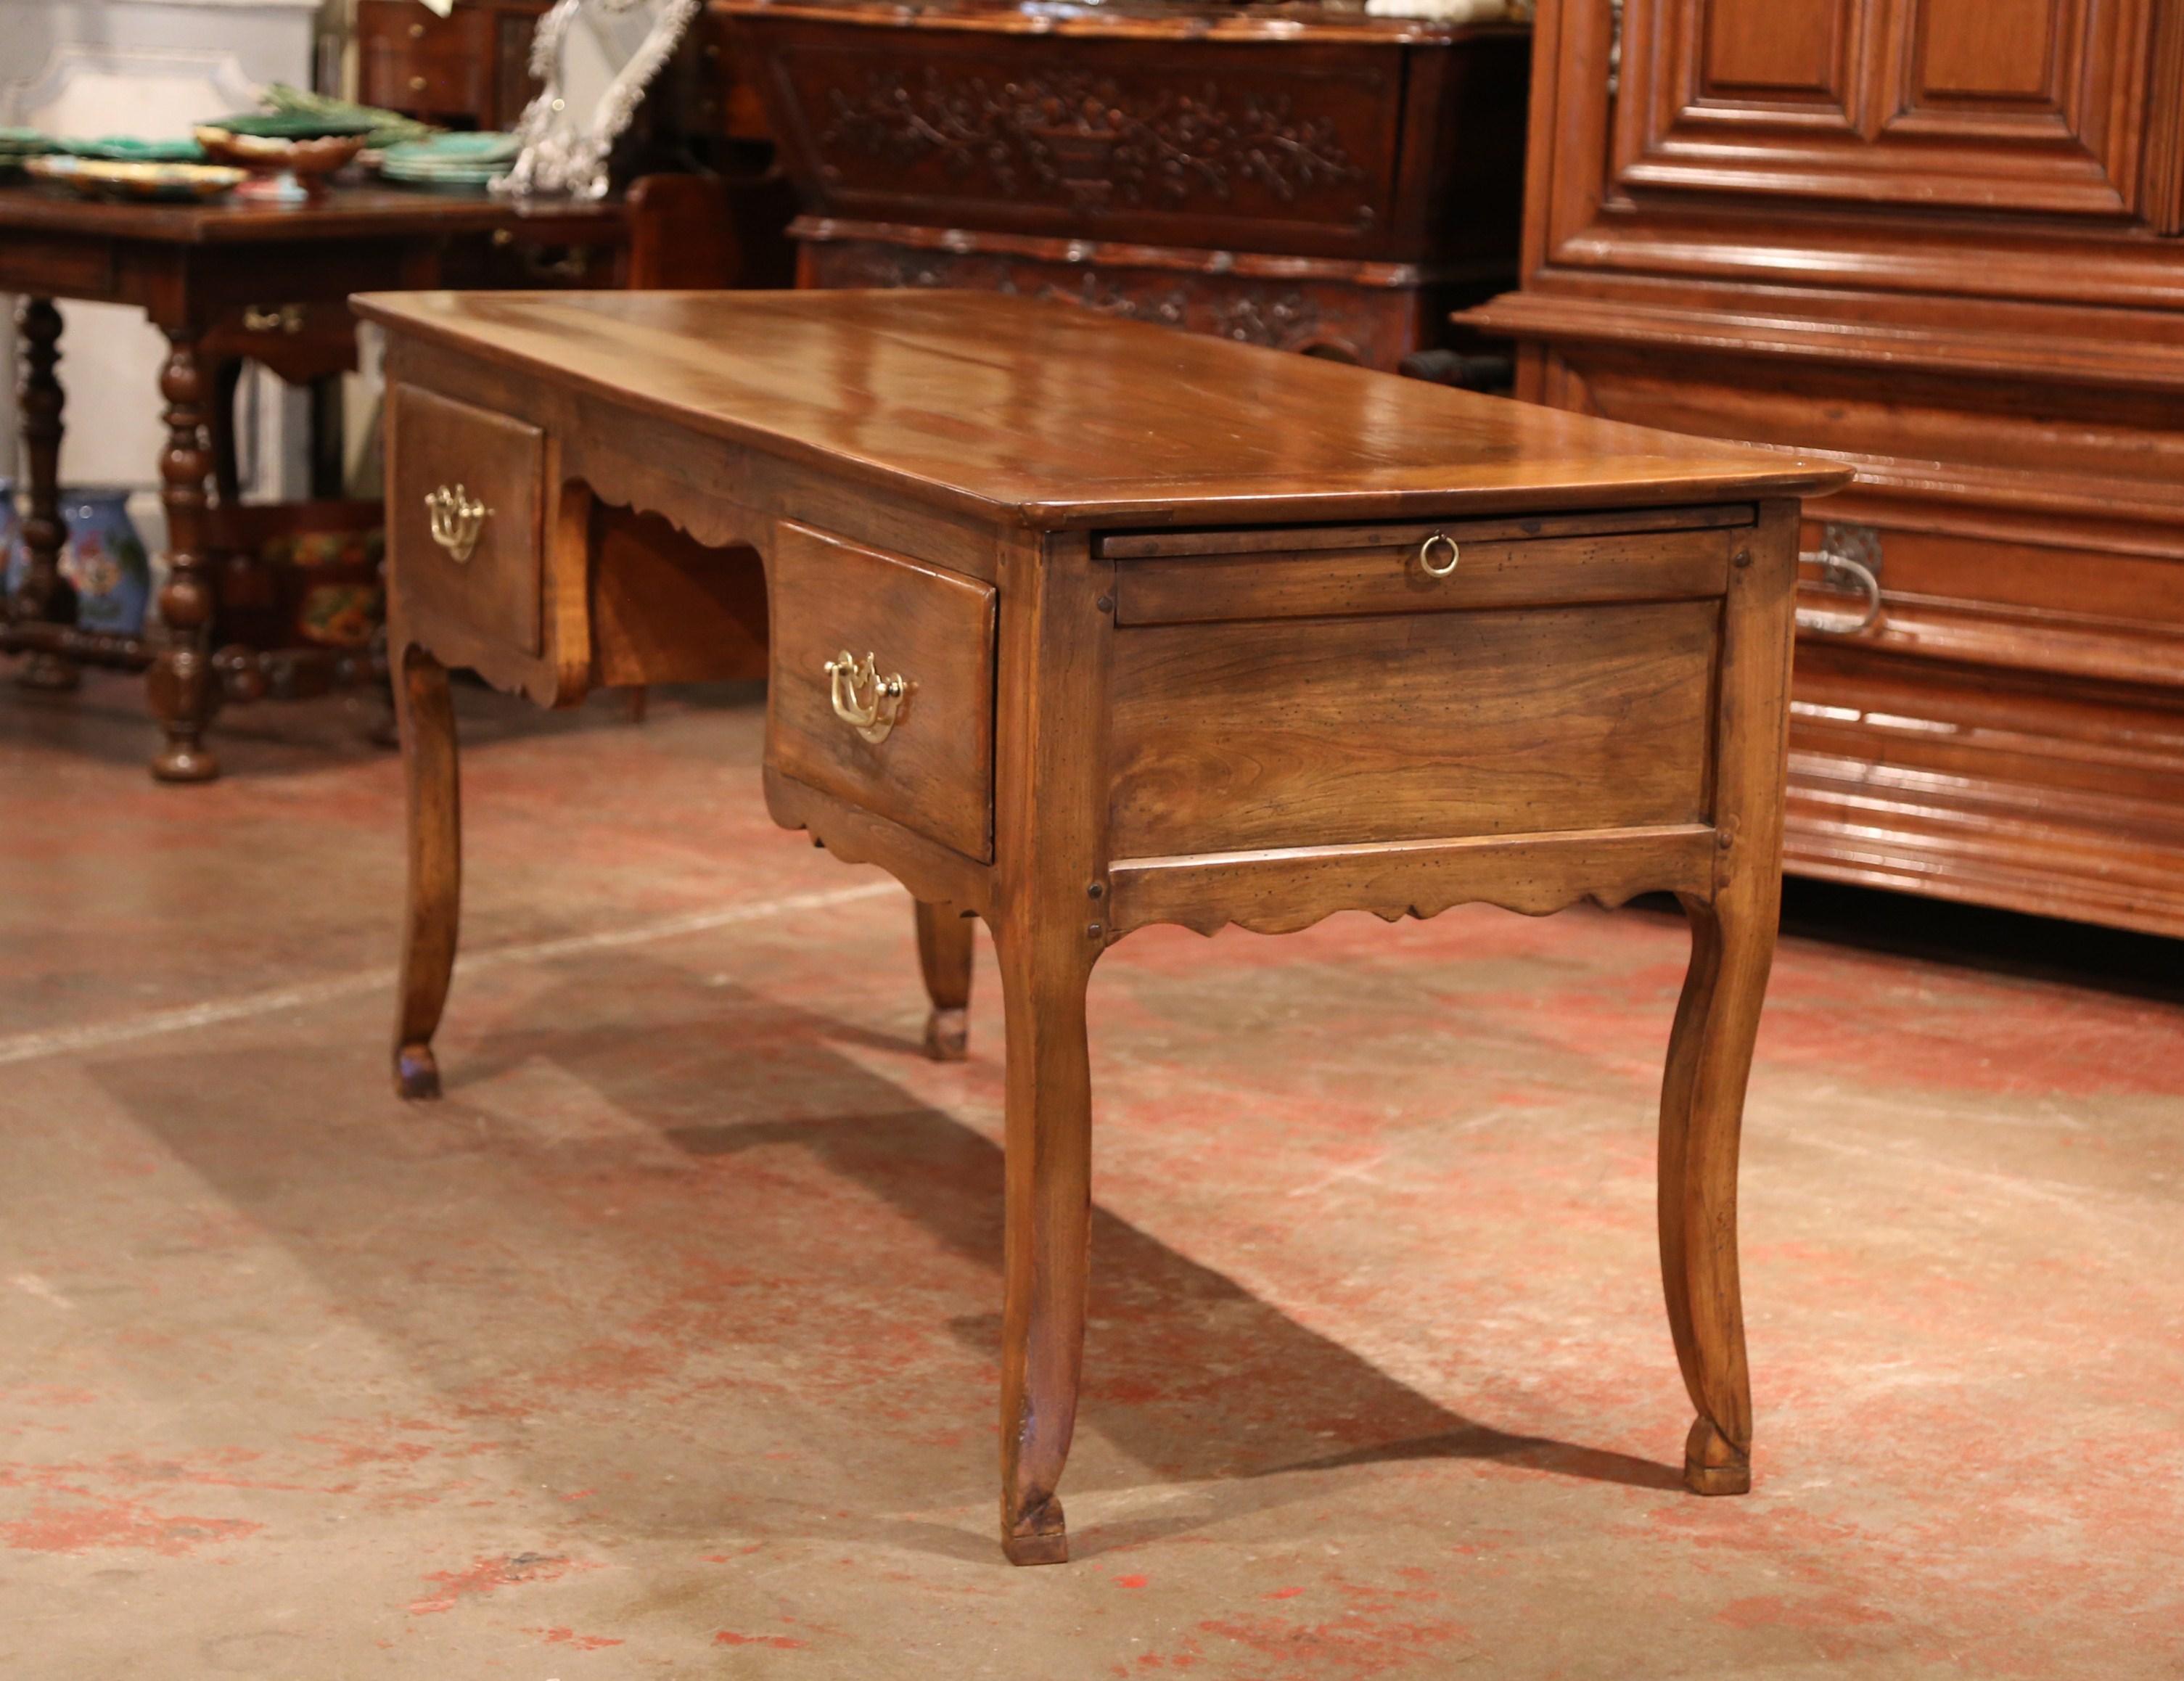 19th Century French Louis XV Carved Cherry Desk with Drawers and Pull Out Trays (19. Jahrhundert)